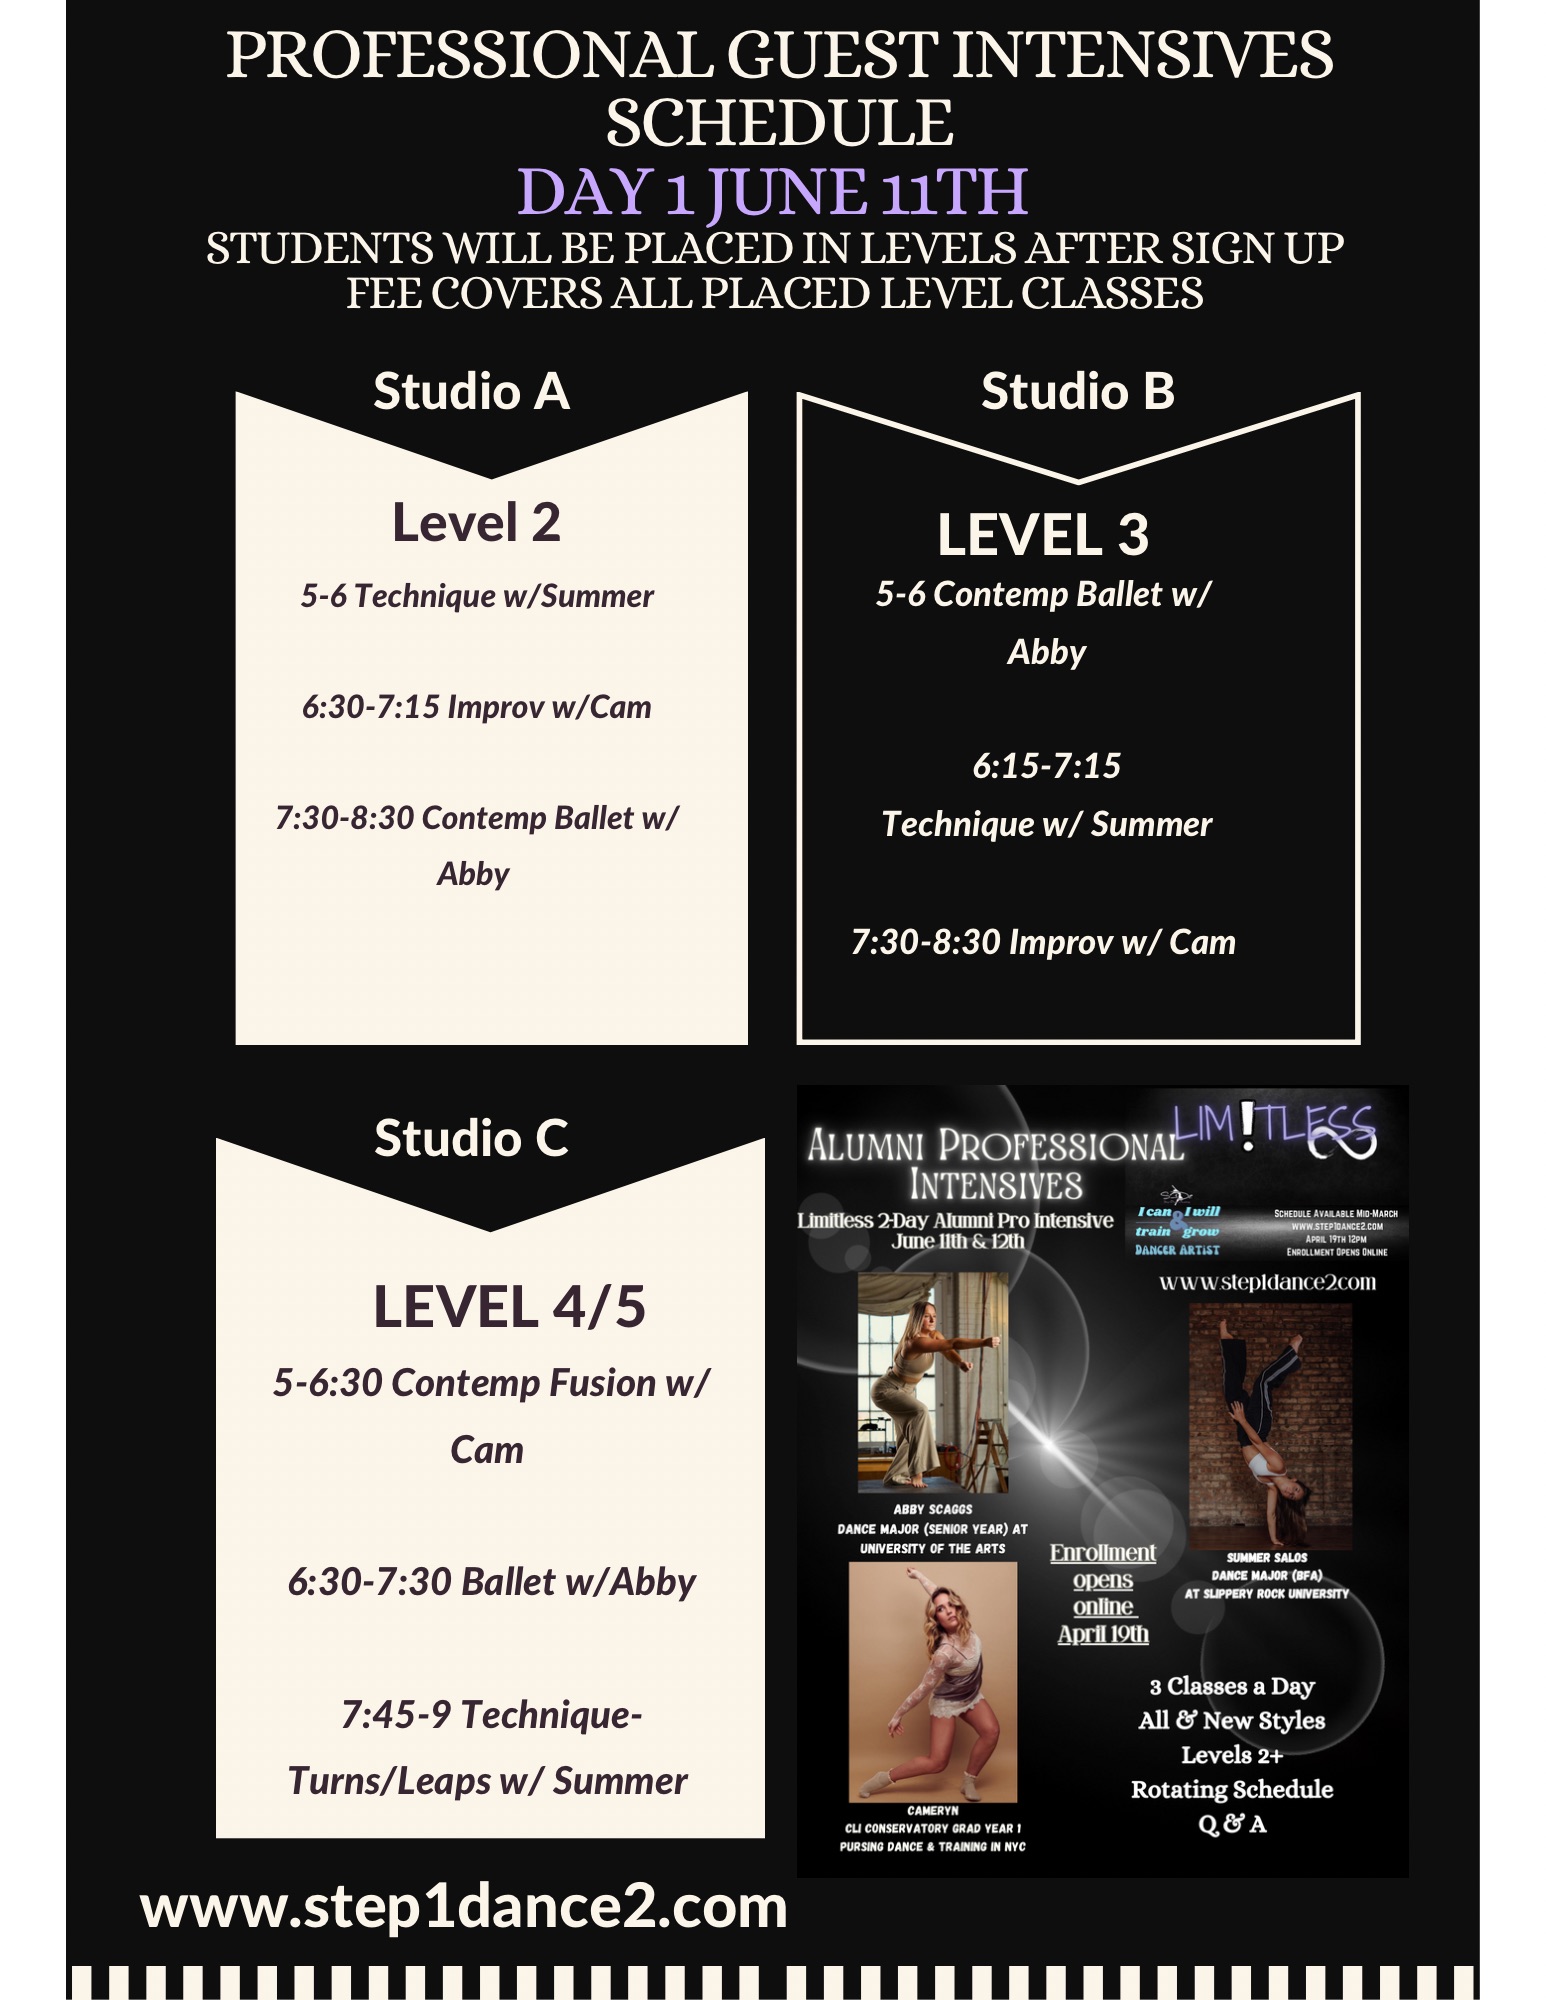 Limitless Professional Guest Intensives Schedule - Day 1